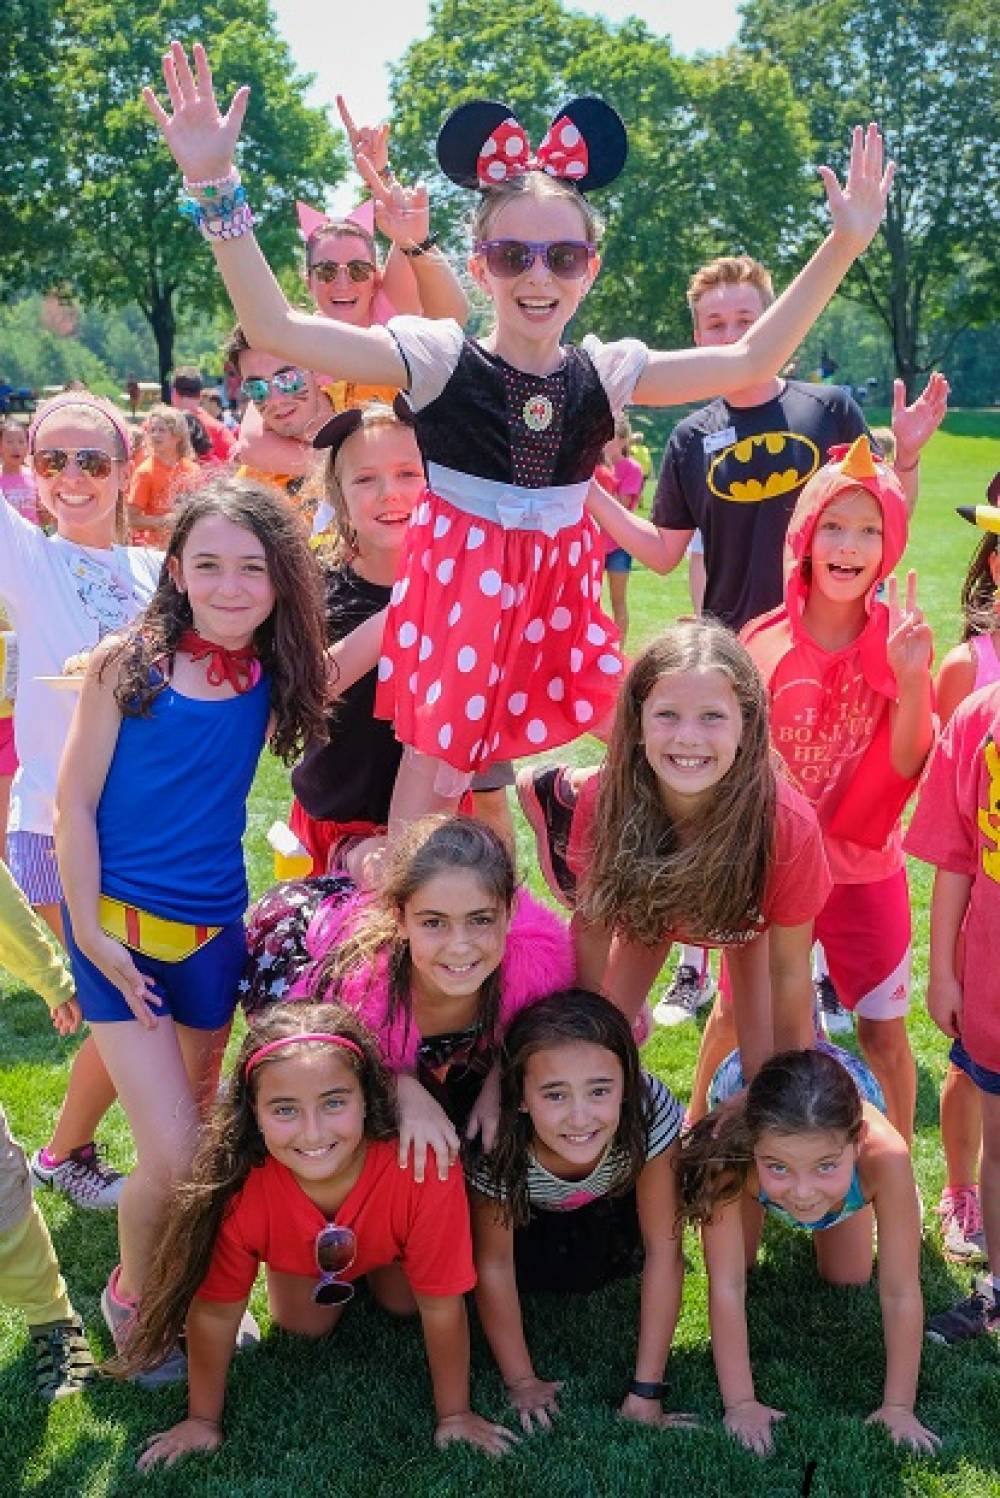 TOP MASSACHUSETTS GYMNASTICS CAMP: Nobles Day Camp is a Top Gymnastics Summer Camp located in Dedham Massachusetts offering many fun and enriching Gymnastics and other camp programs. 